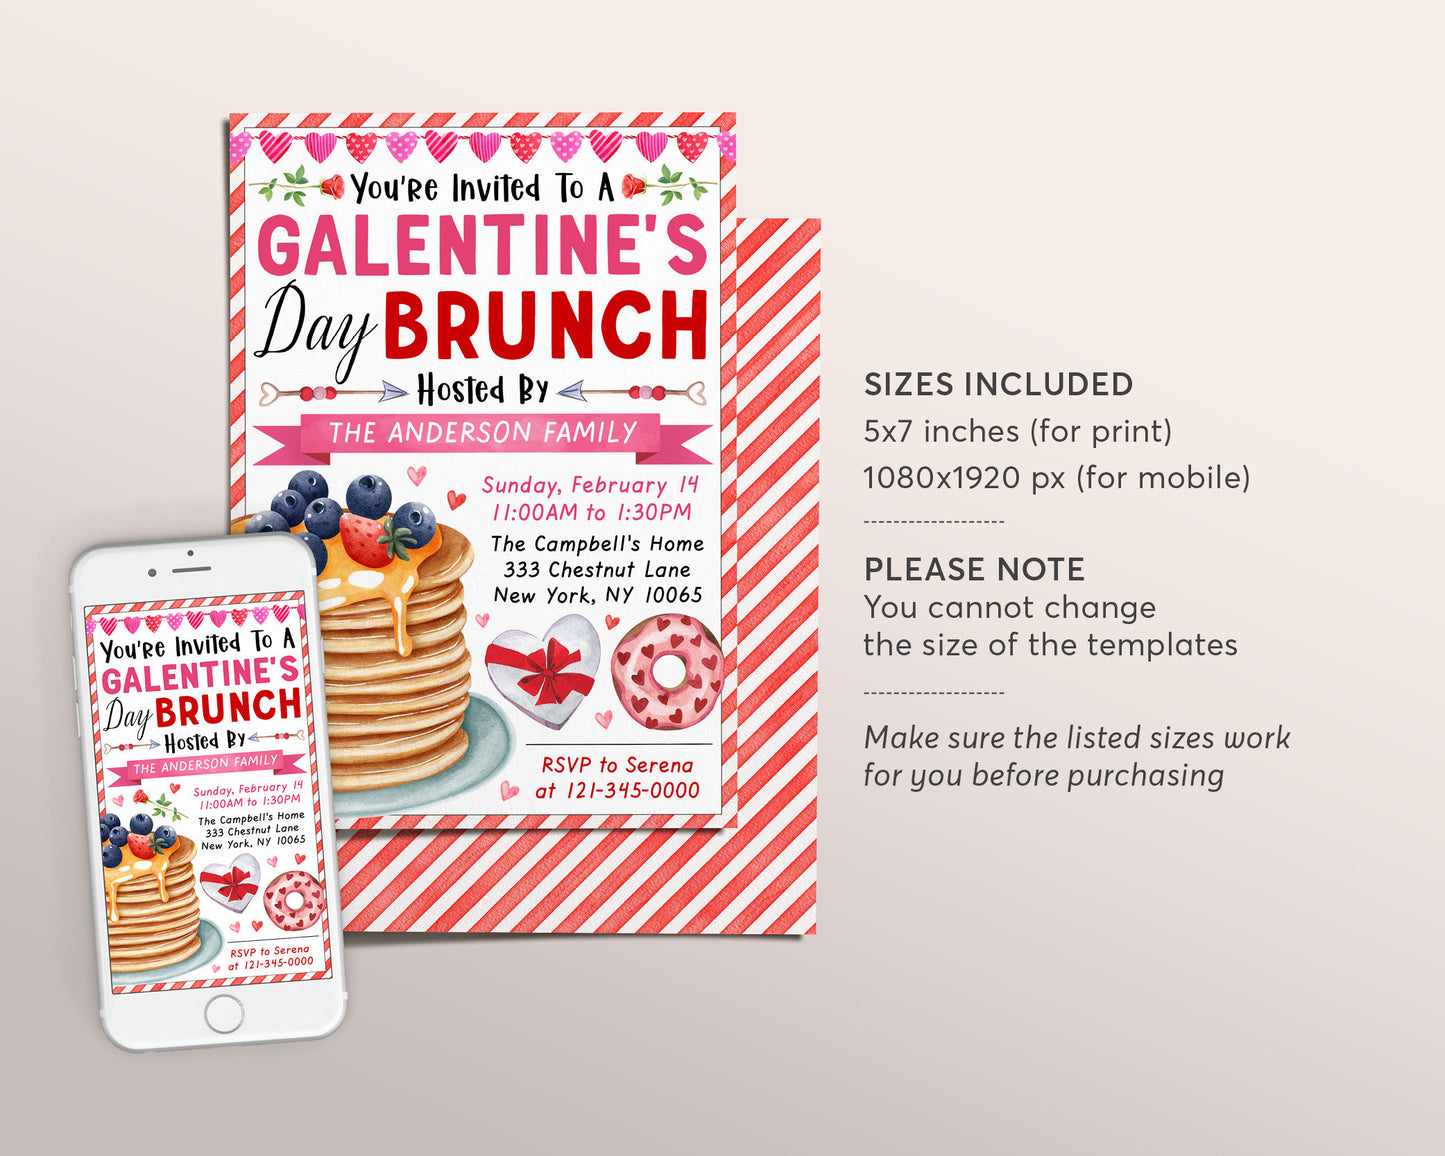 Galentine's Day Brunch Invitation Editable Template, Valentines Day Pancakes Breakfast Lunch Party Invite For Girl Friends Invite Evite